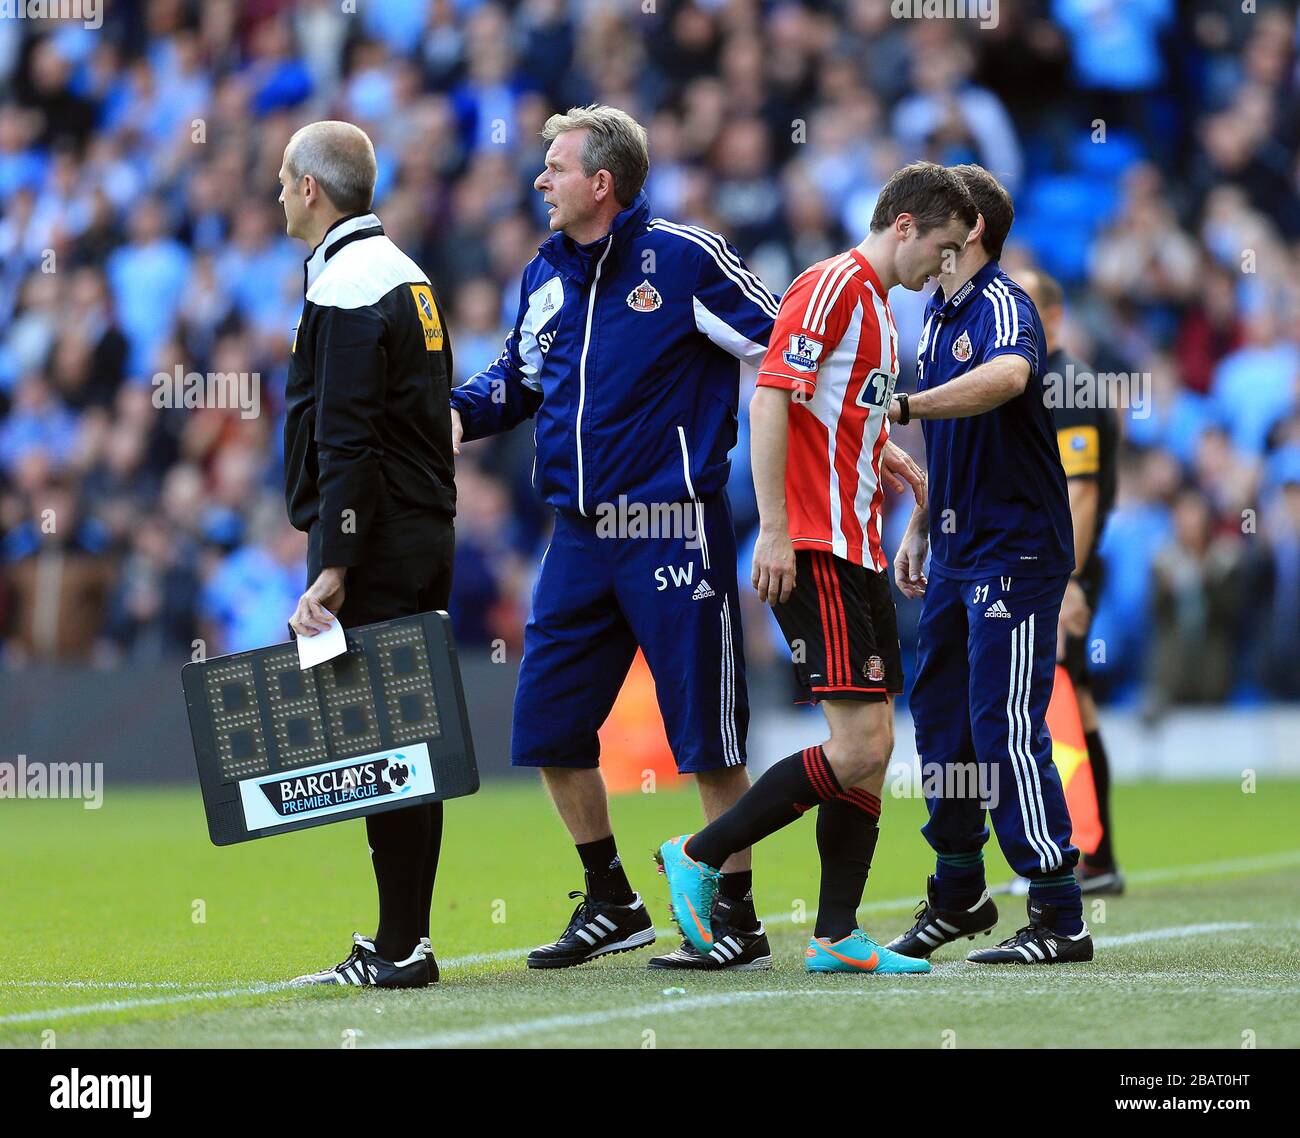 Sunderland's Andrew Johnson is substituted Stock Photo